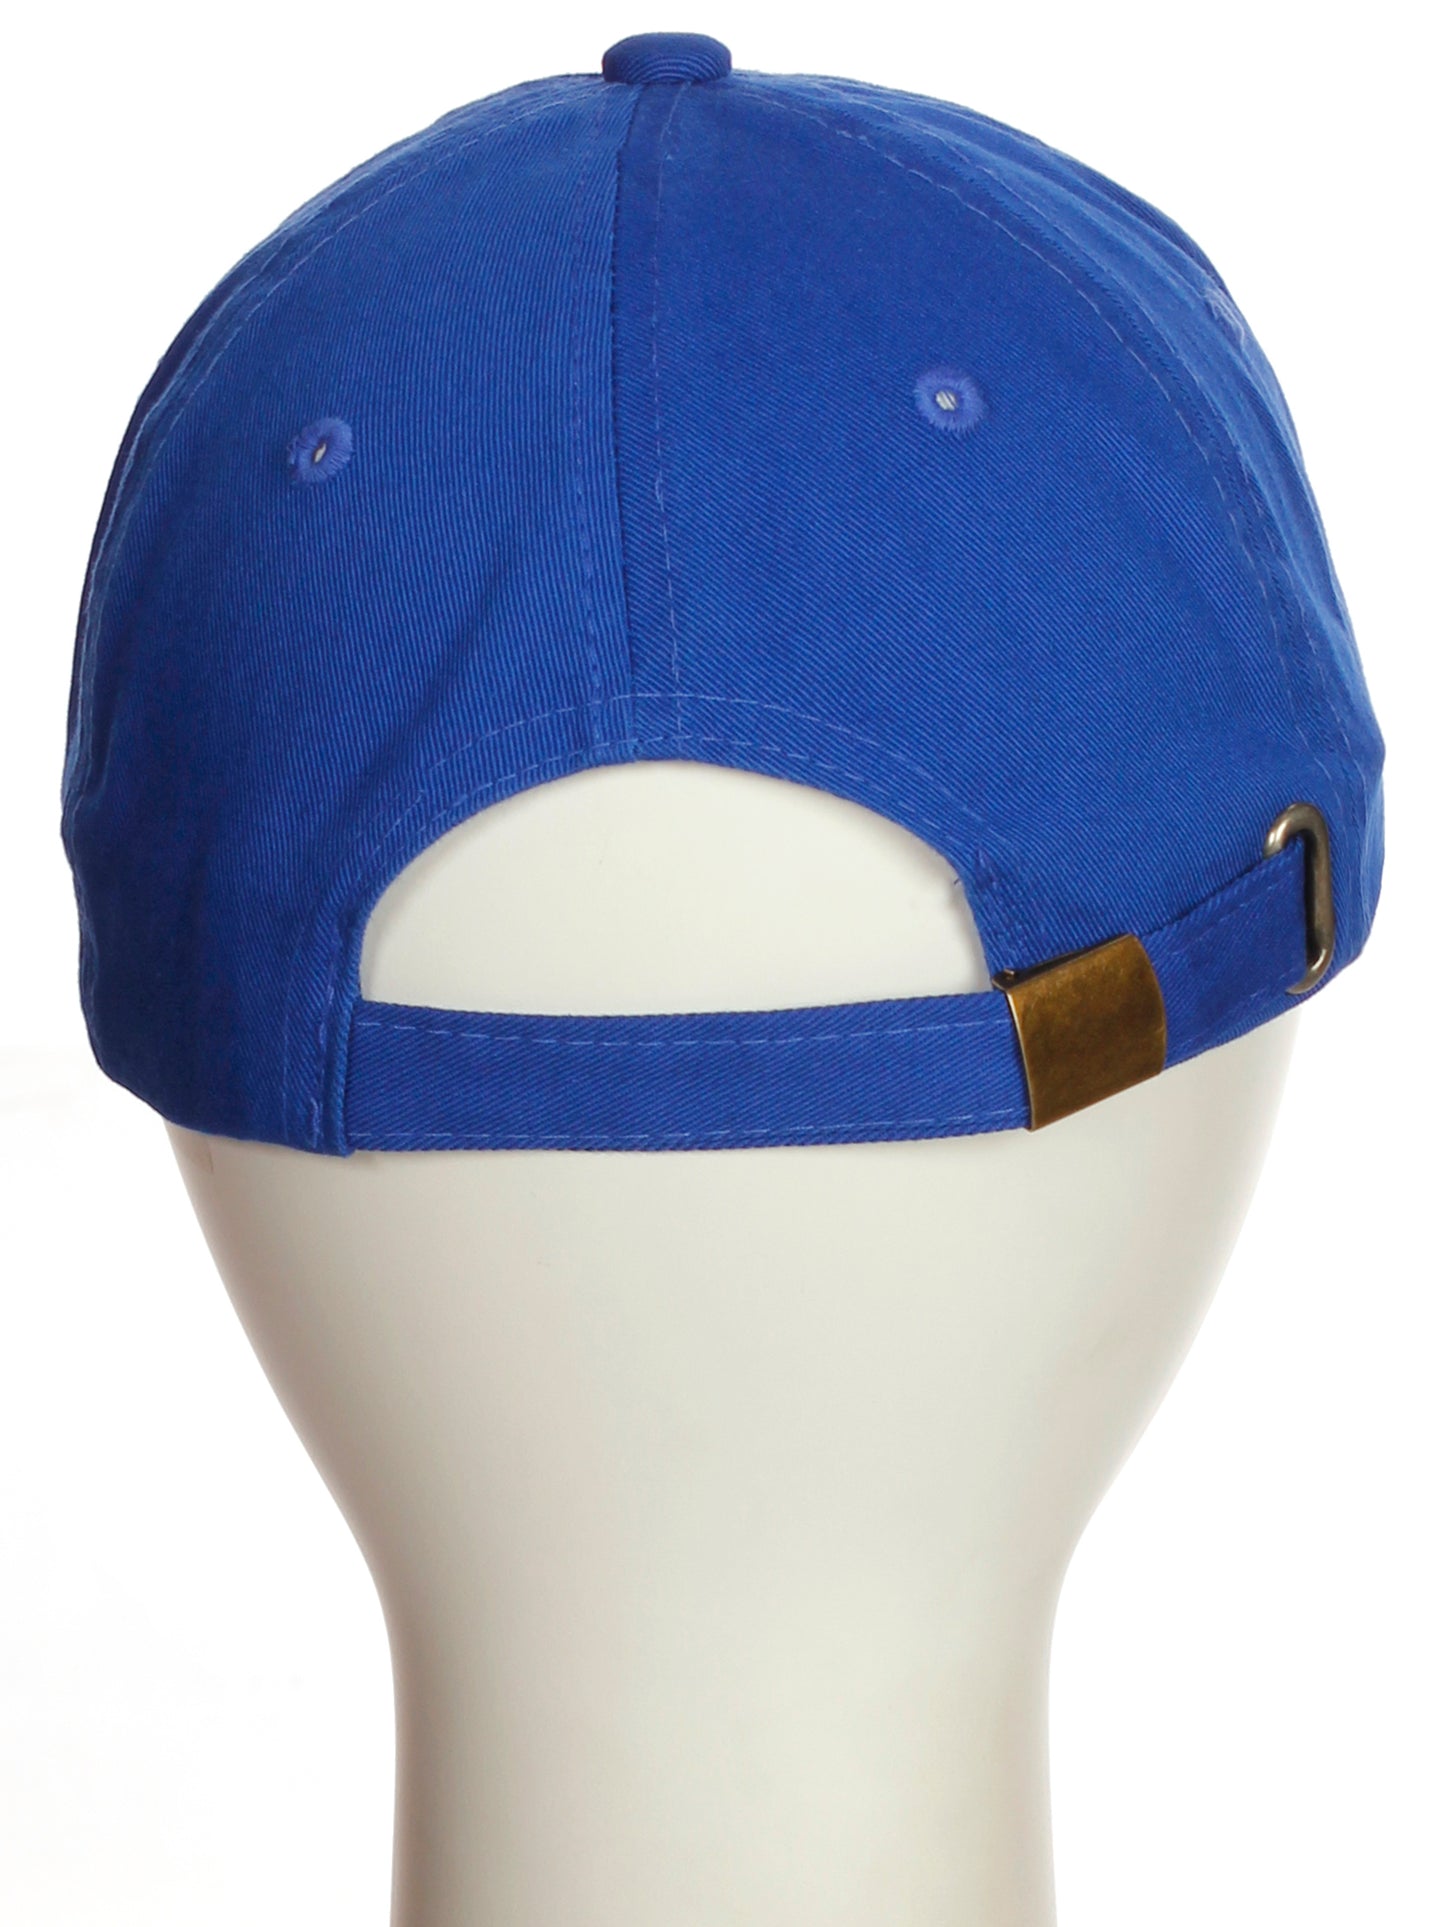 I&W Hatgear Customized Letter Initial Baseball Hat A to Z Team Colors, Blue Cap Navy White